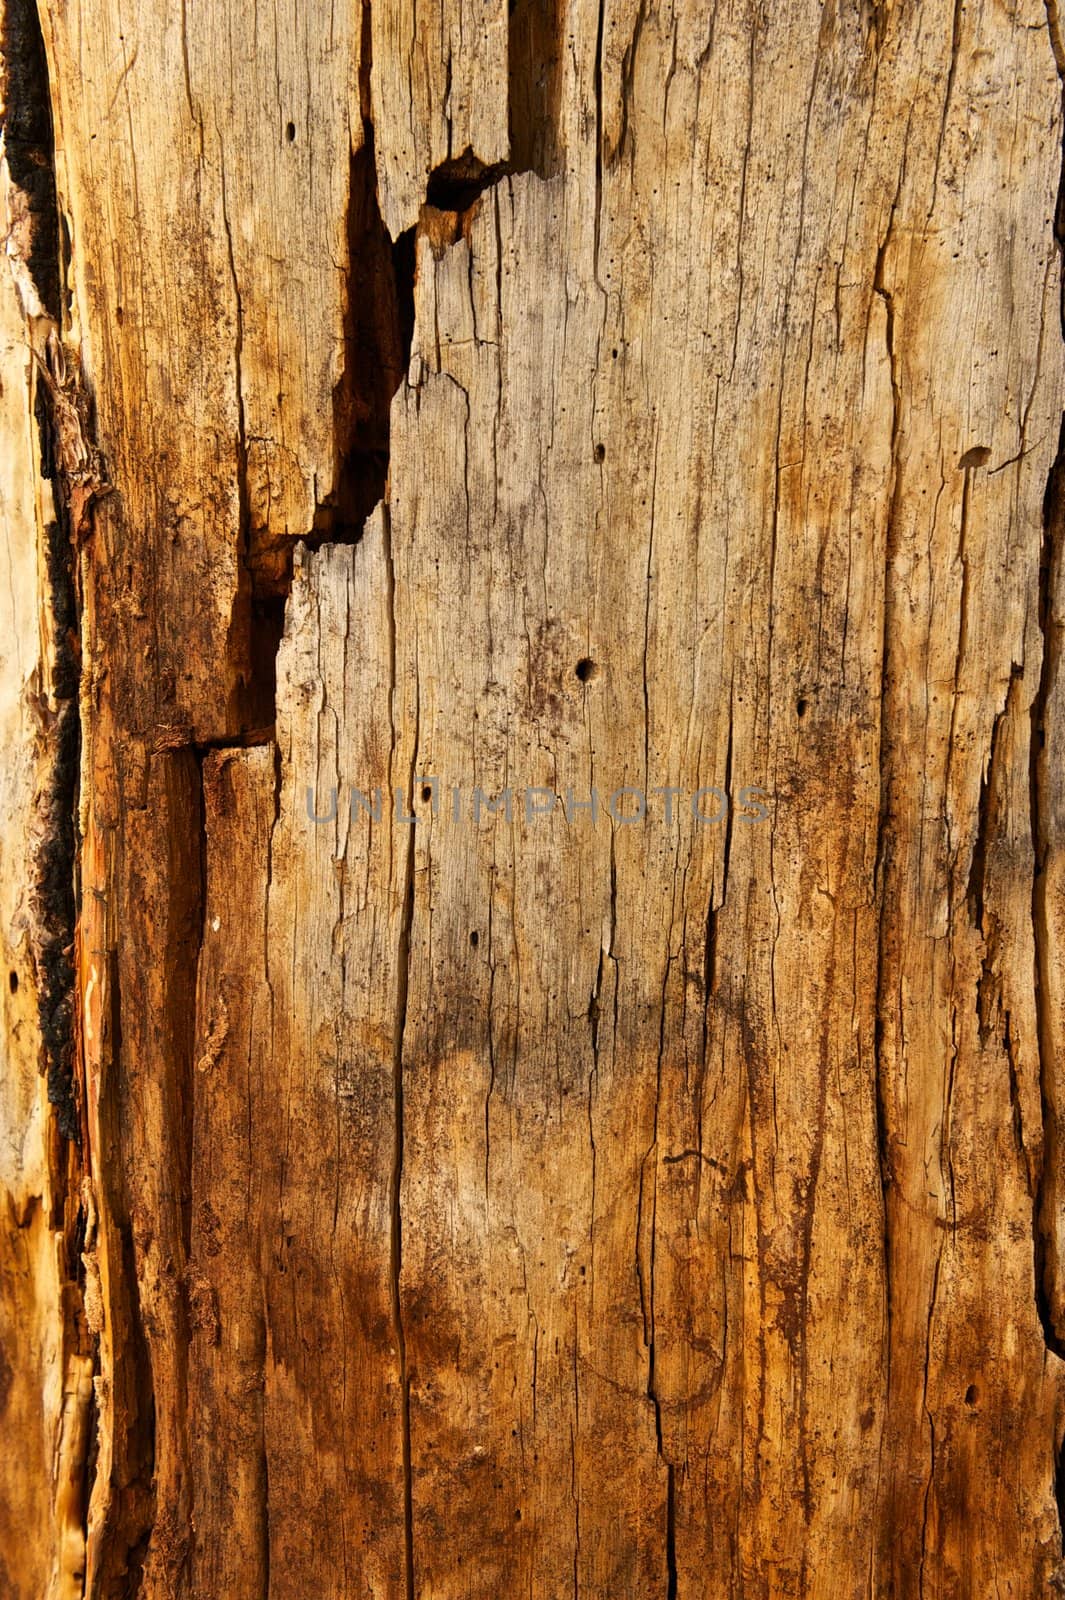 Tree Trunk With Cracks and Holes by pixelsnap